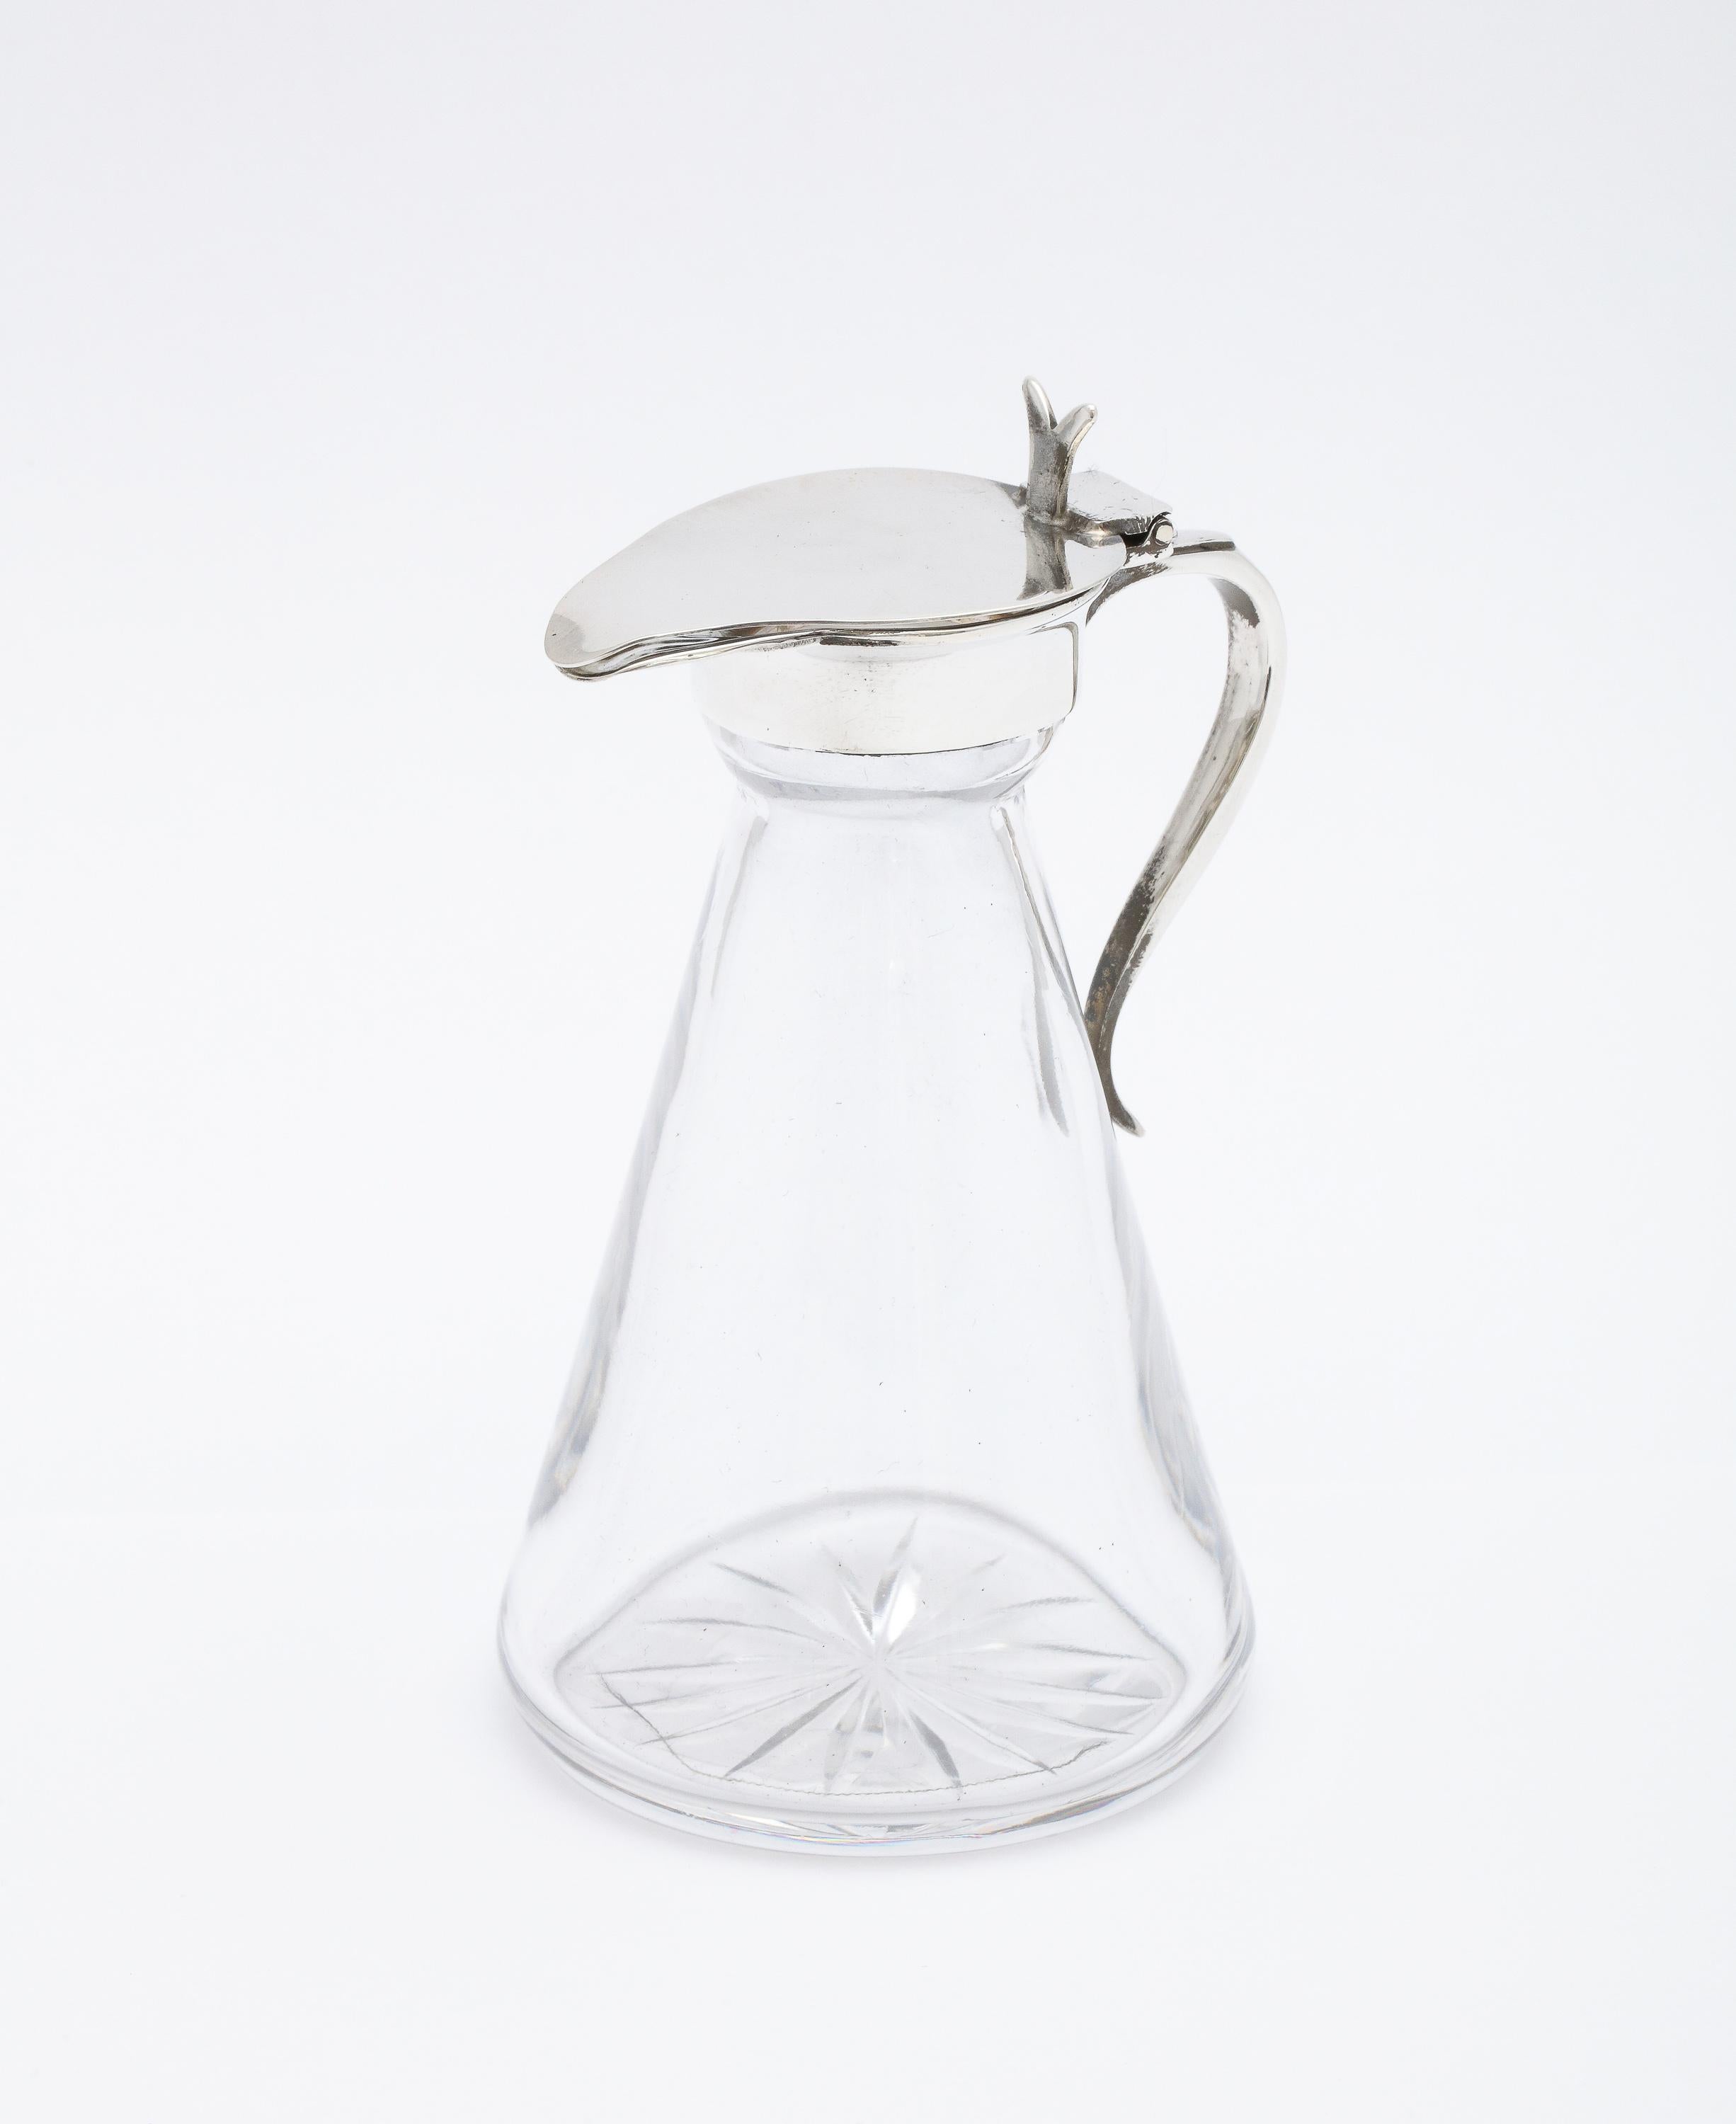 Edwardian-style, sterling silver-mounted glass whiskey tot, Birmingham, England, year-hallmarked for 1959, Barker Bros. Silver, Ltd.- makers. Graceful design, having an incised starburst pattern on its underside. Handle is also sterling silver.